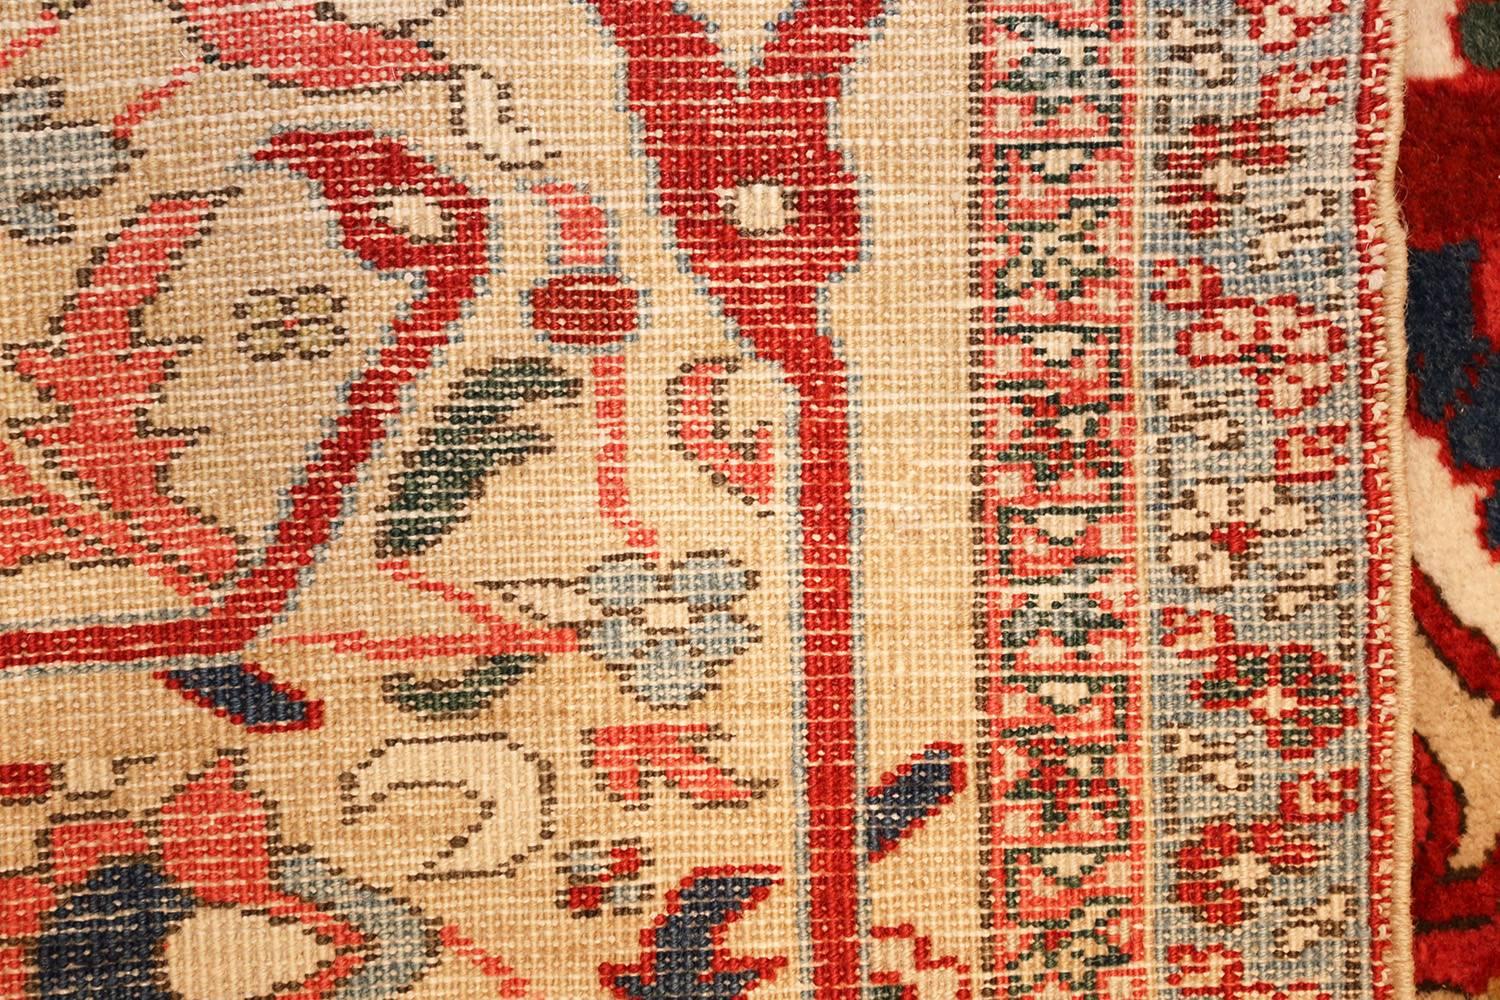 Beautiful and luxurious antique Persian Serapi rug, country of origin / rug type: Persian rug, date circa late 19th century. Size: 12 ft. 3 in x 17 ft. 9 in (3.73 m x 5.41 m). Antique Persian Serapi rugs have an elegant and timeless character that